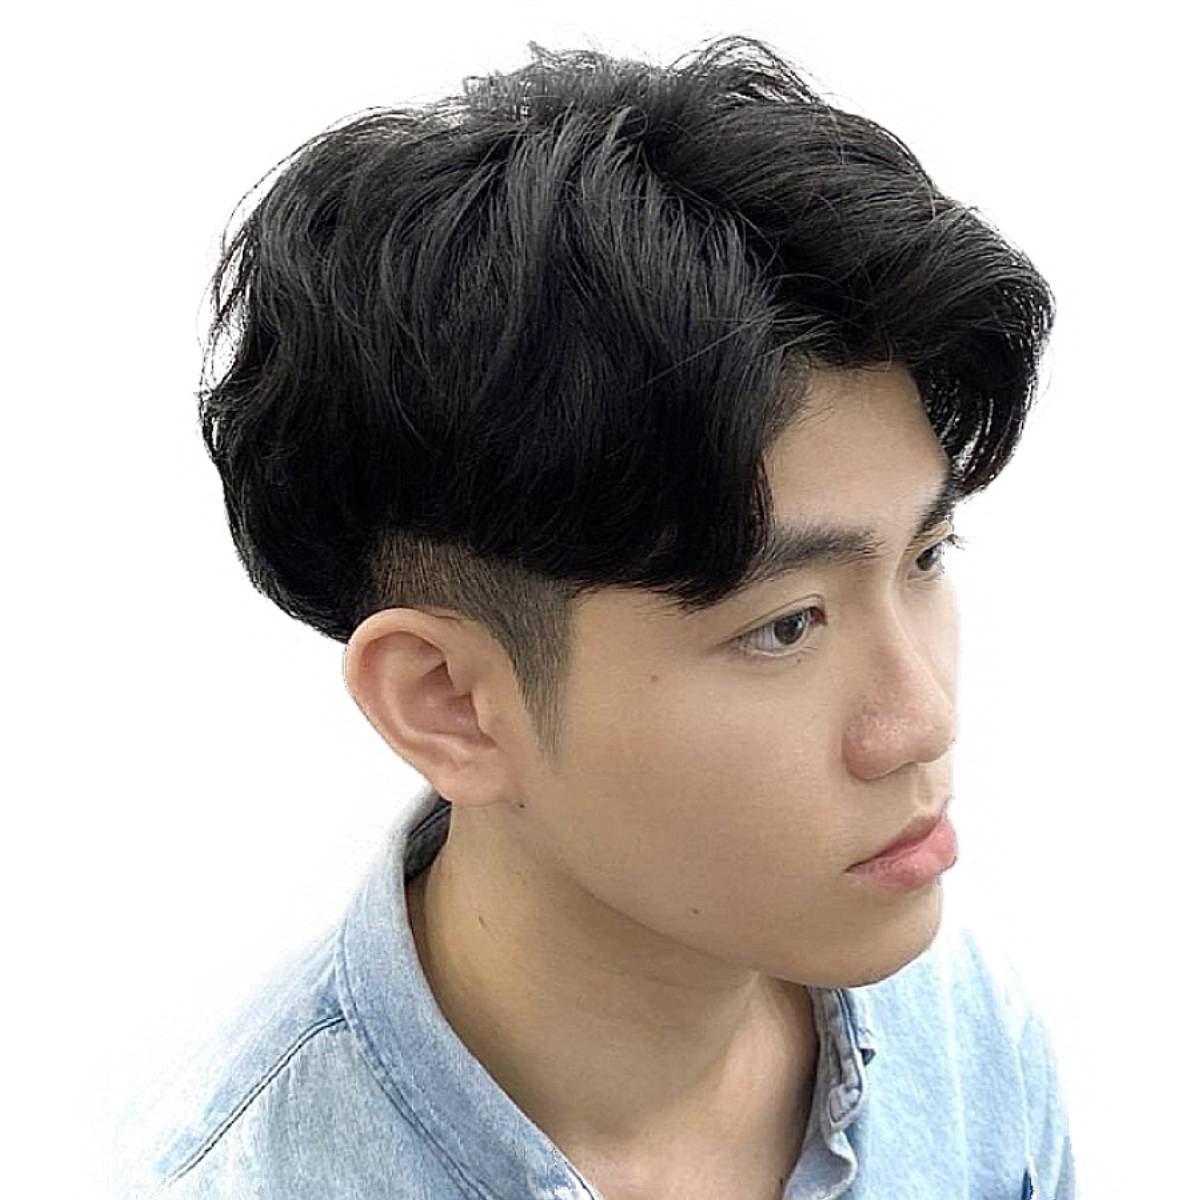 60 Popular Hairstyles For Asian Men To Try in 2024 | Asian hair, Asian men  hairstyle, Asian man haircut